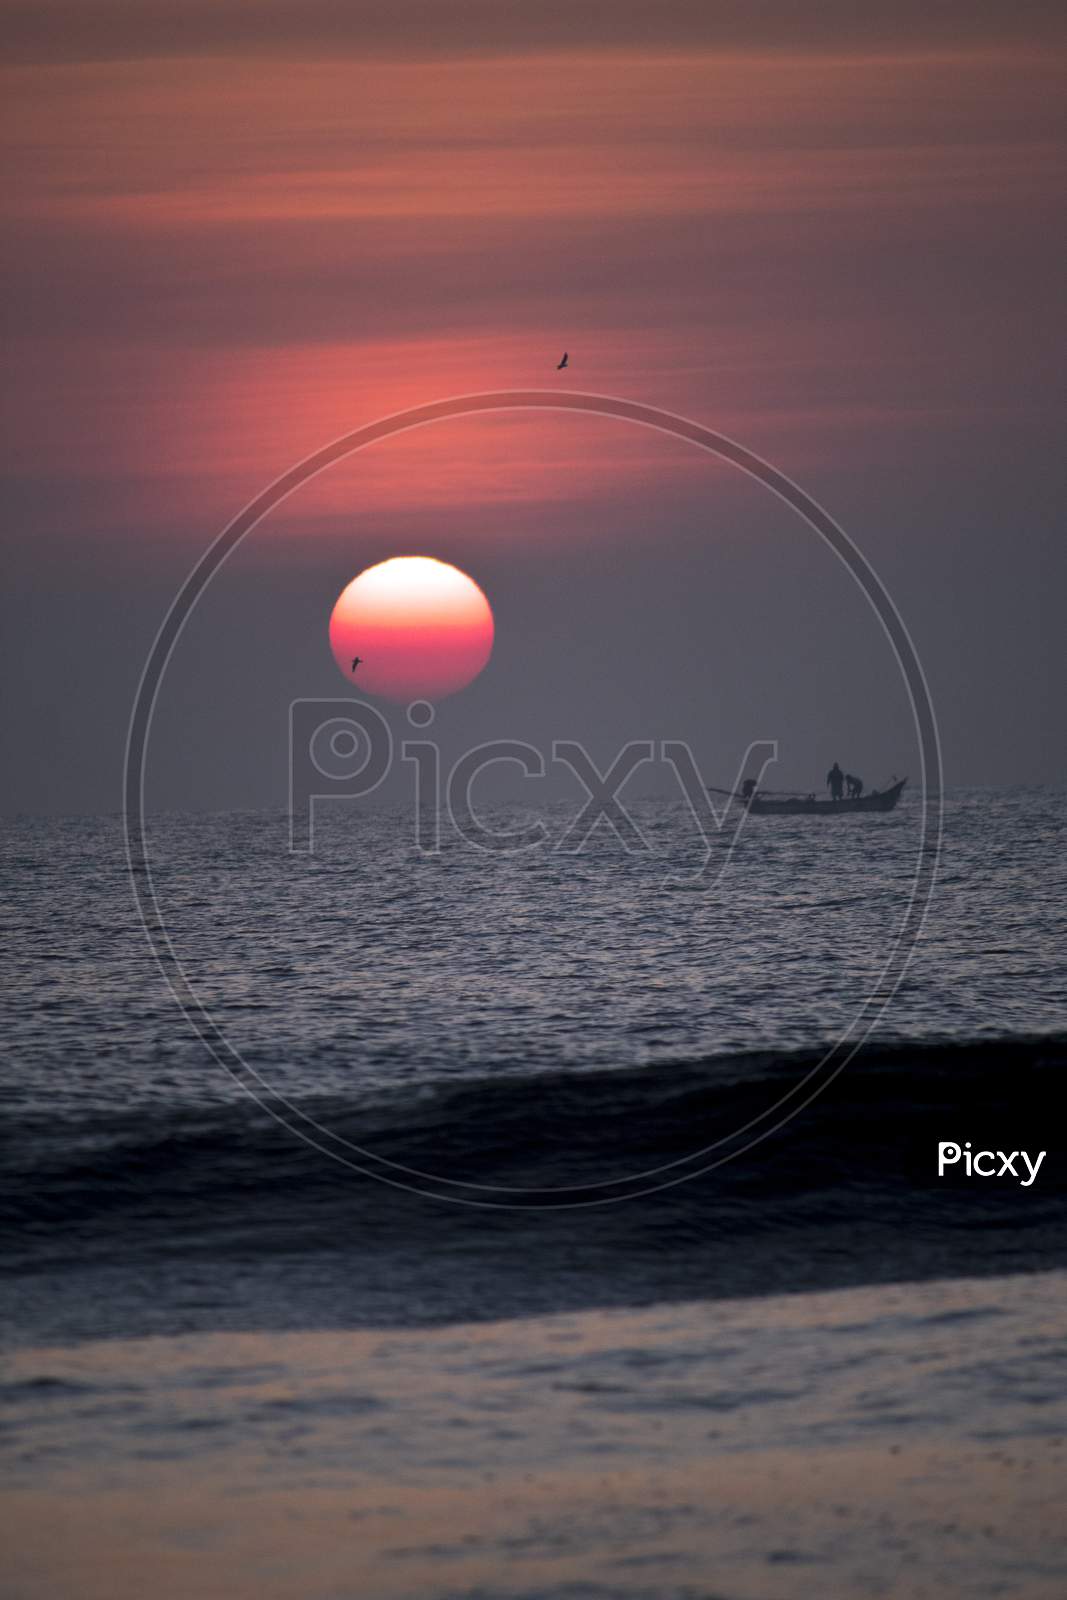 Silhouette Of Fishing Boat On Sea With Sunset Sky  In Background